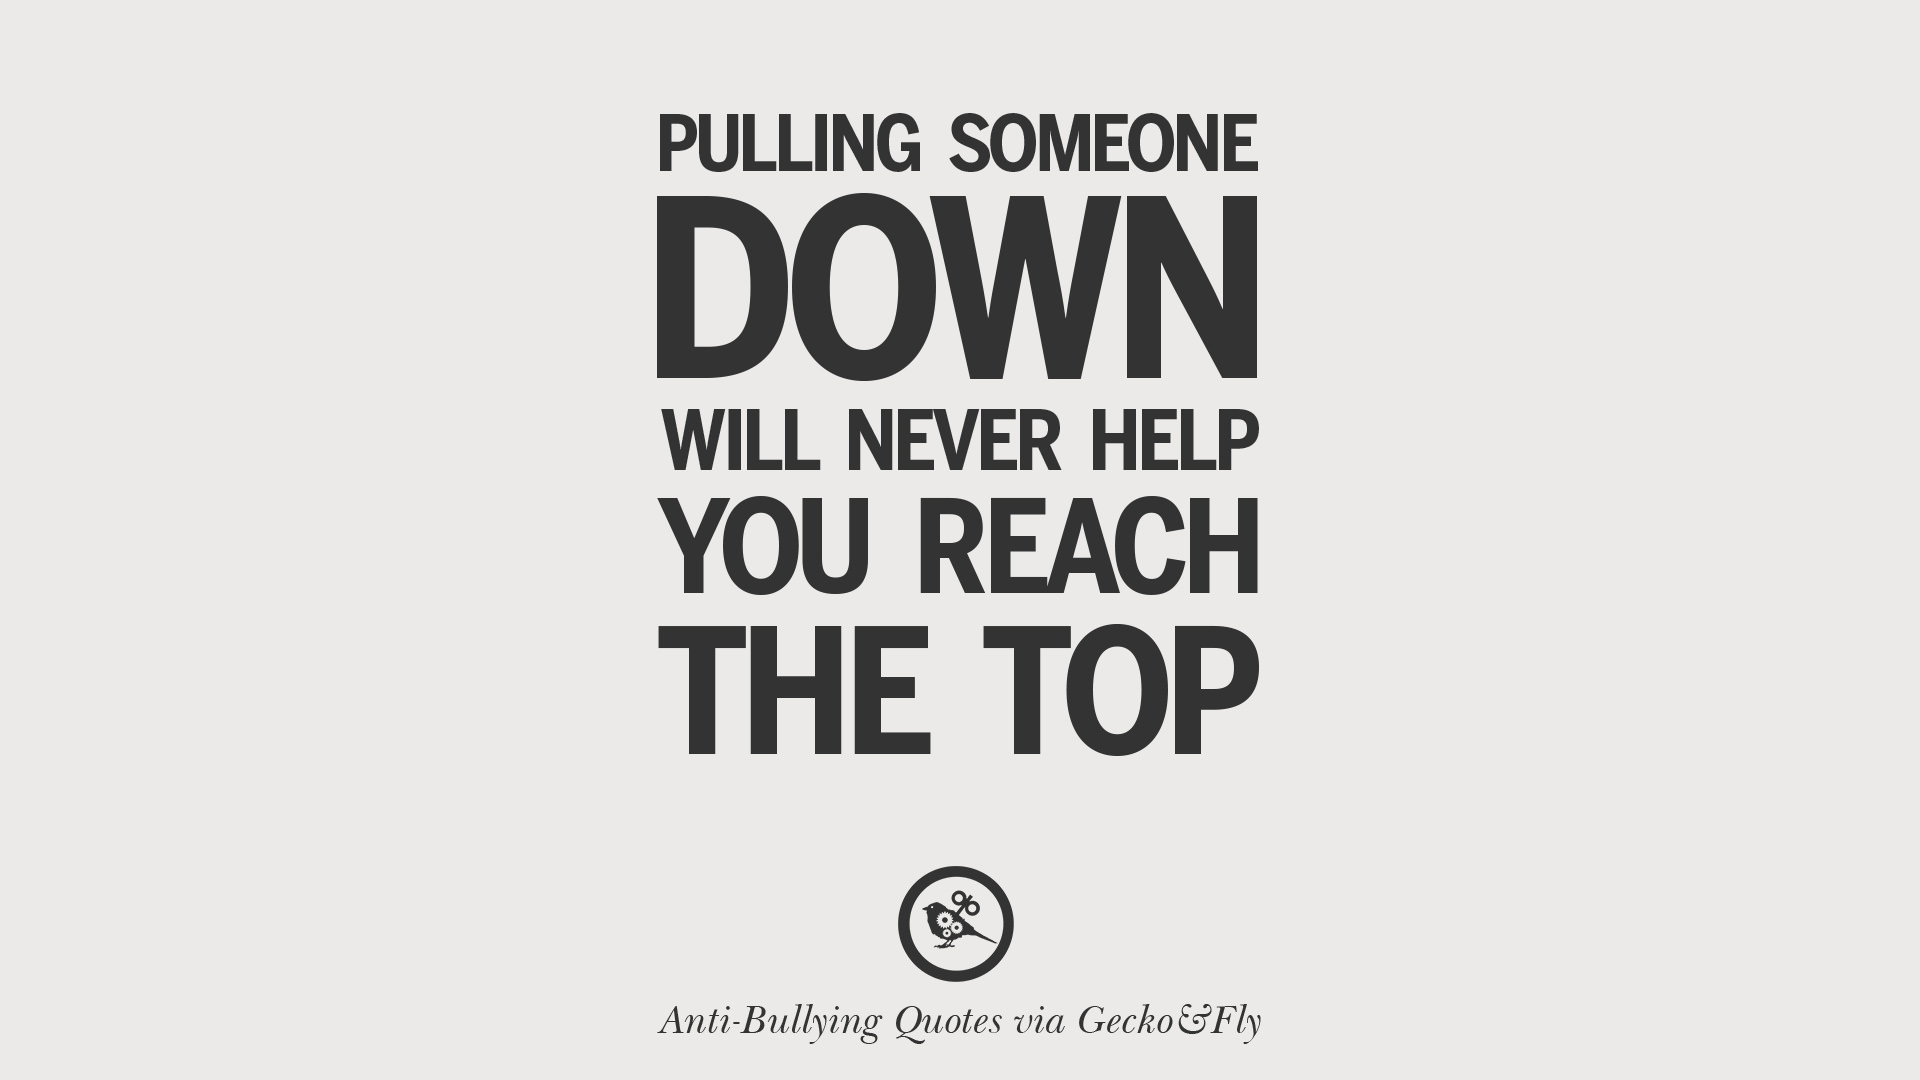 12 Quotes On Anti Cyber Bulling And Social Bullying Effects